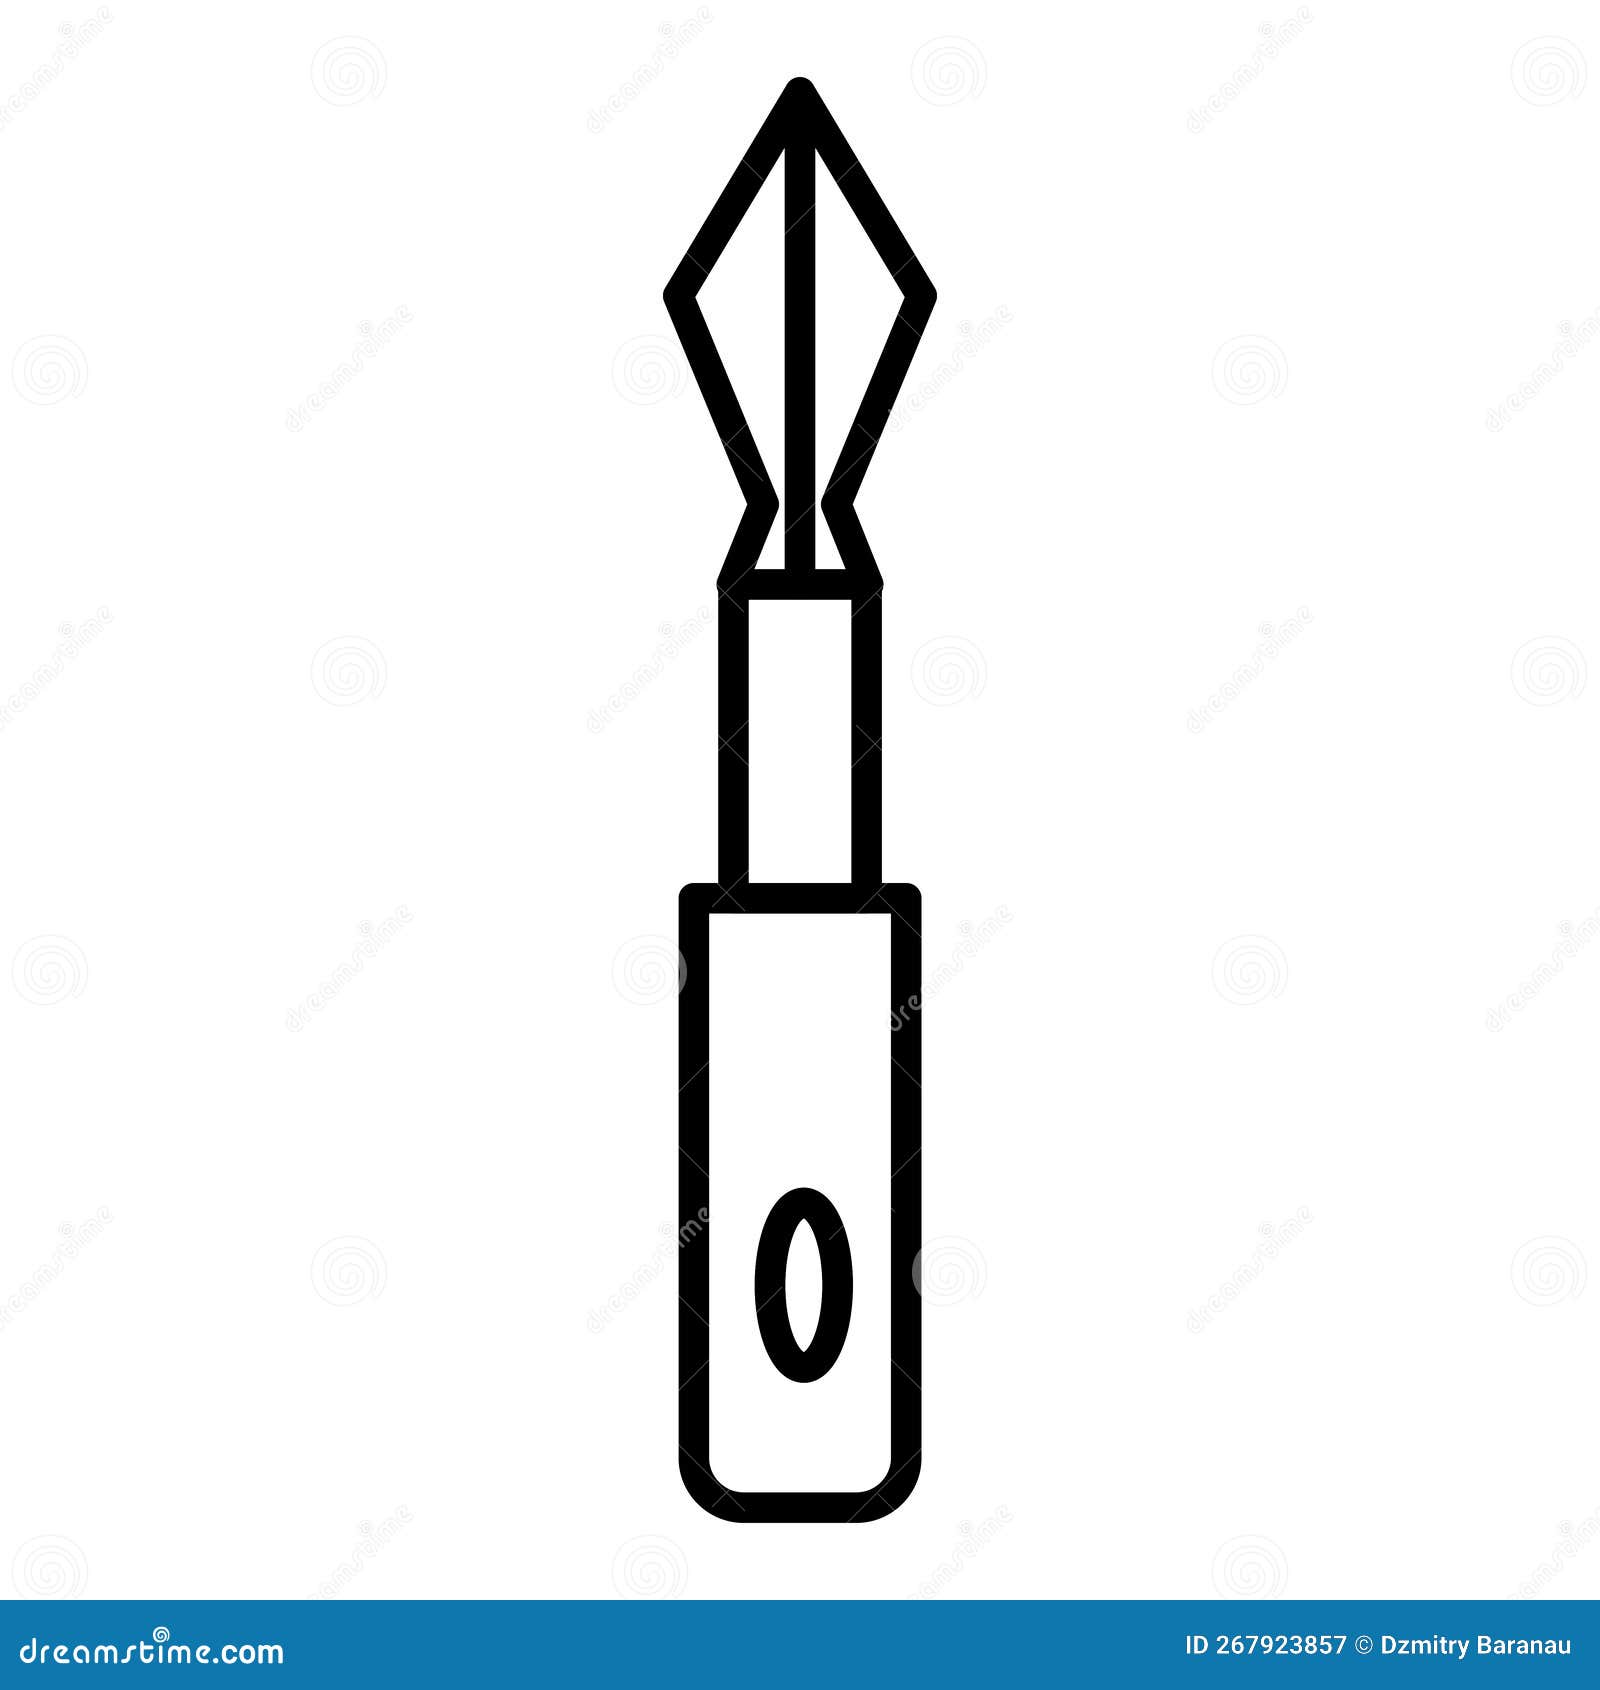 stylo icon line  on white background. black flat thin icon on modern outline style. linear  and editable stroke.